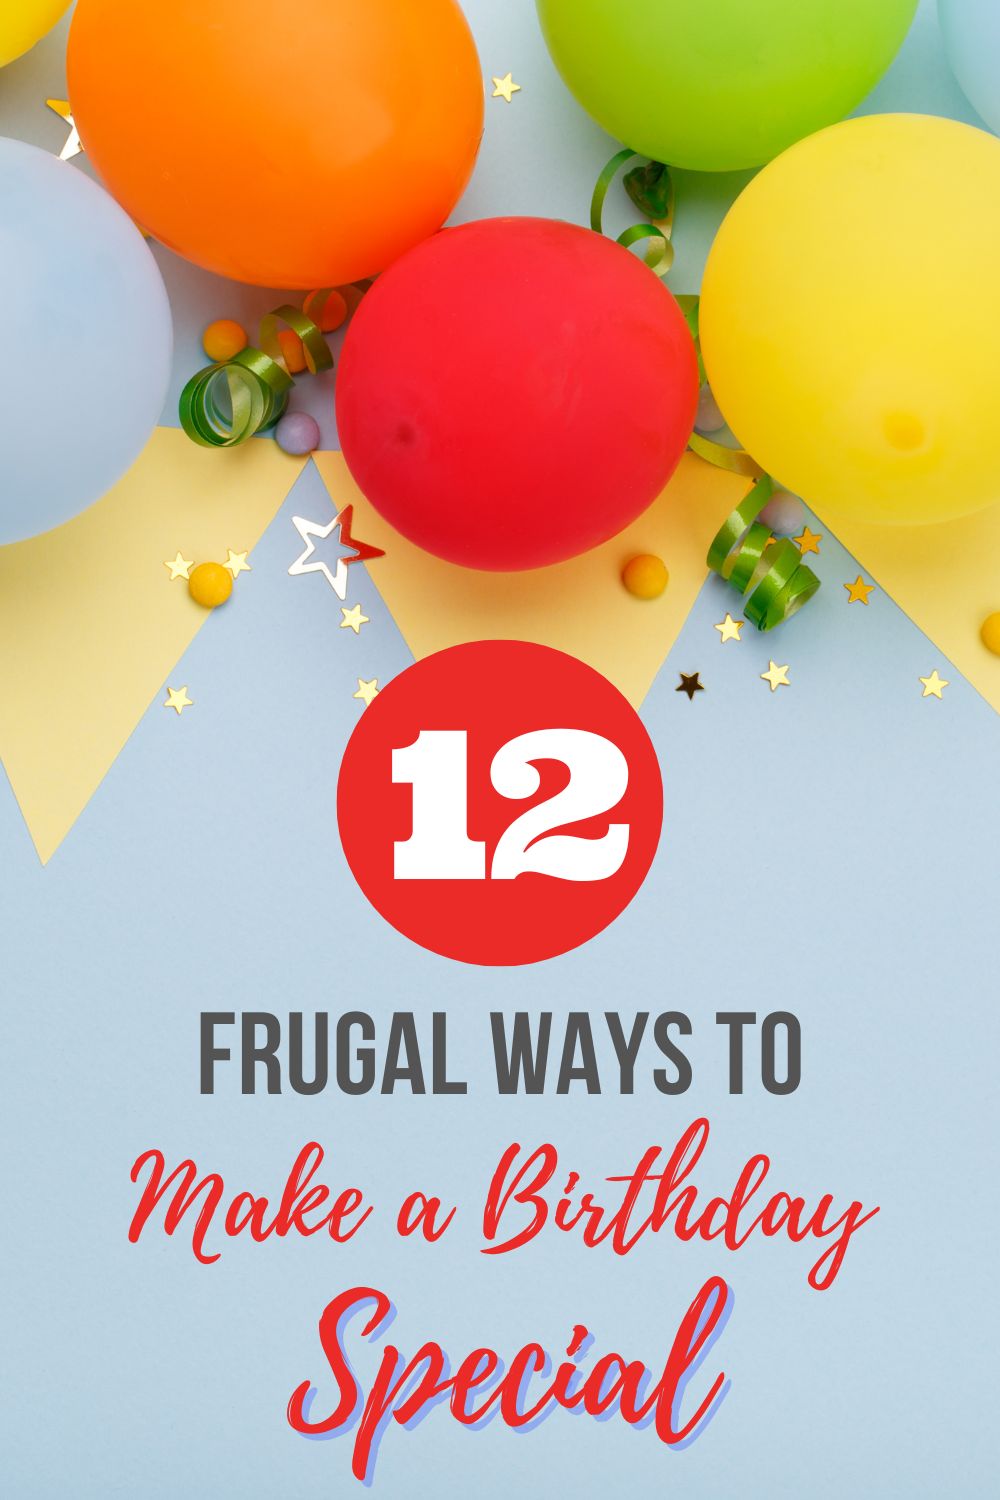 12 Frugal Ways to Make a Birthday Special